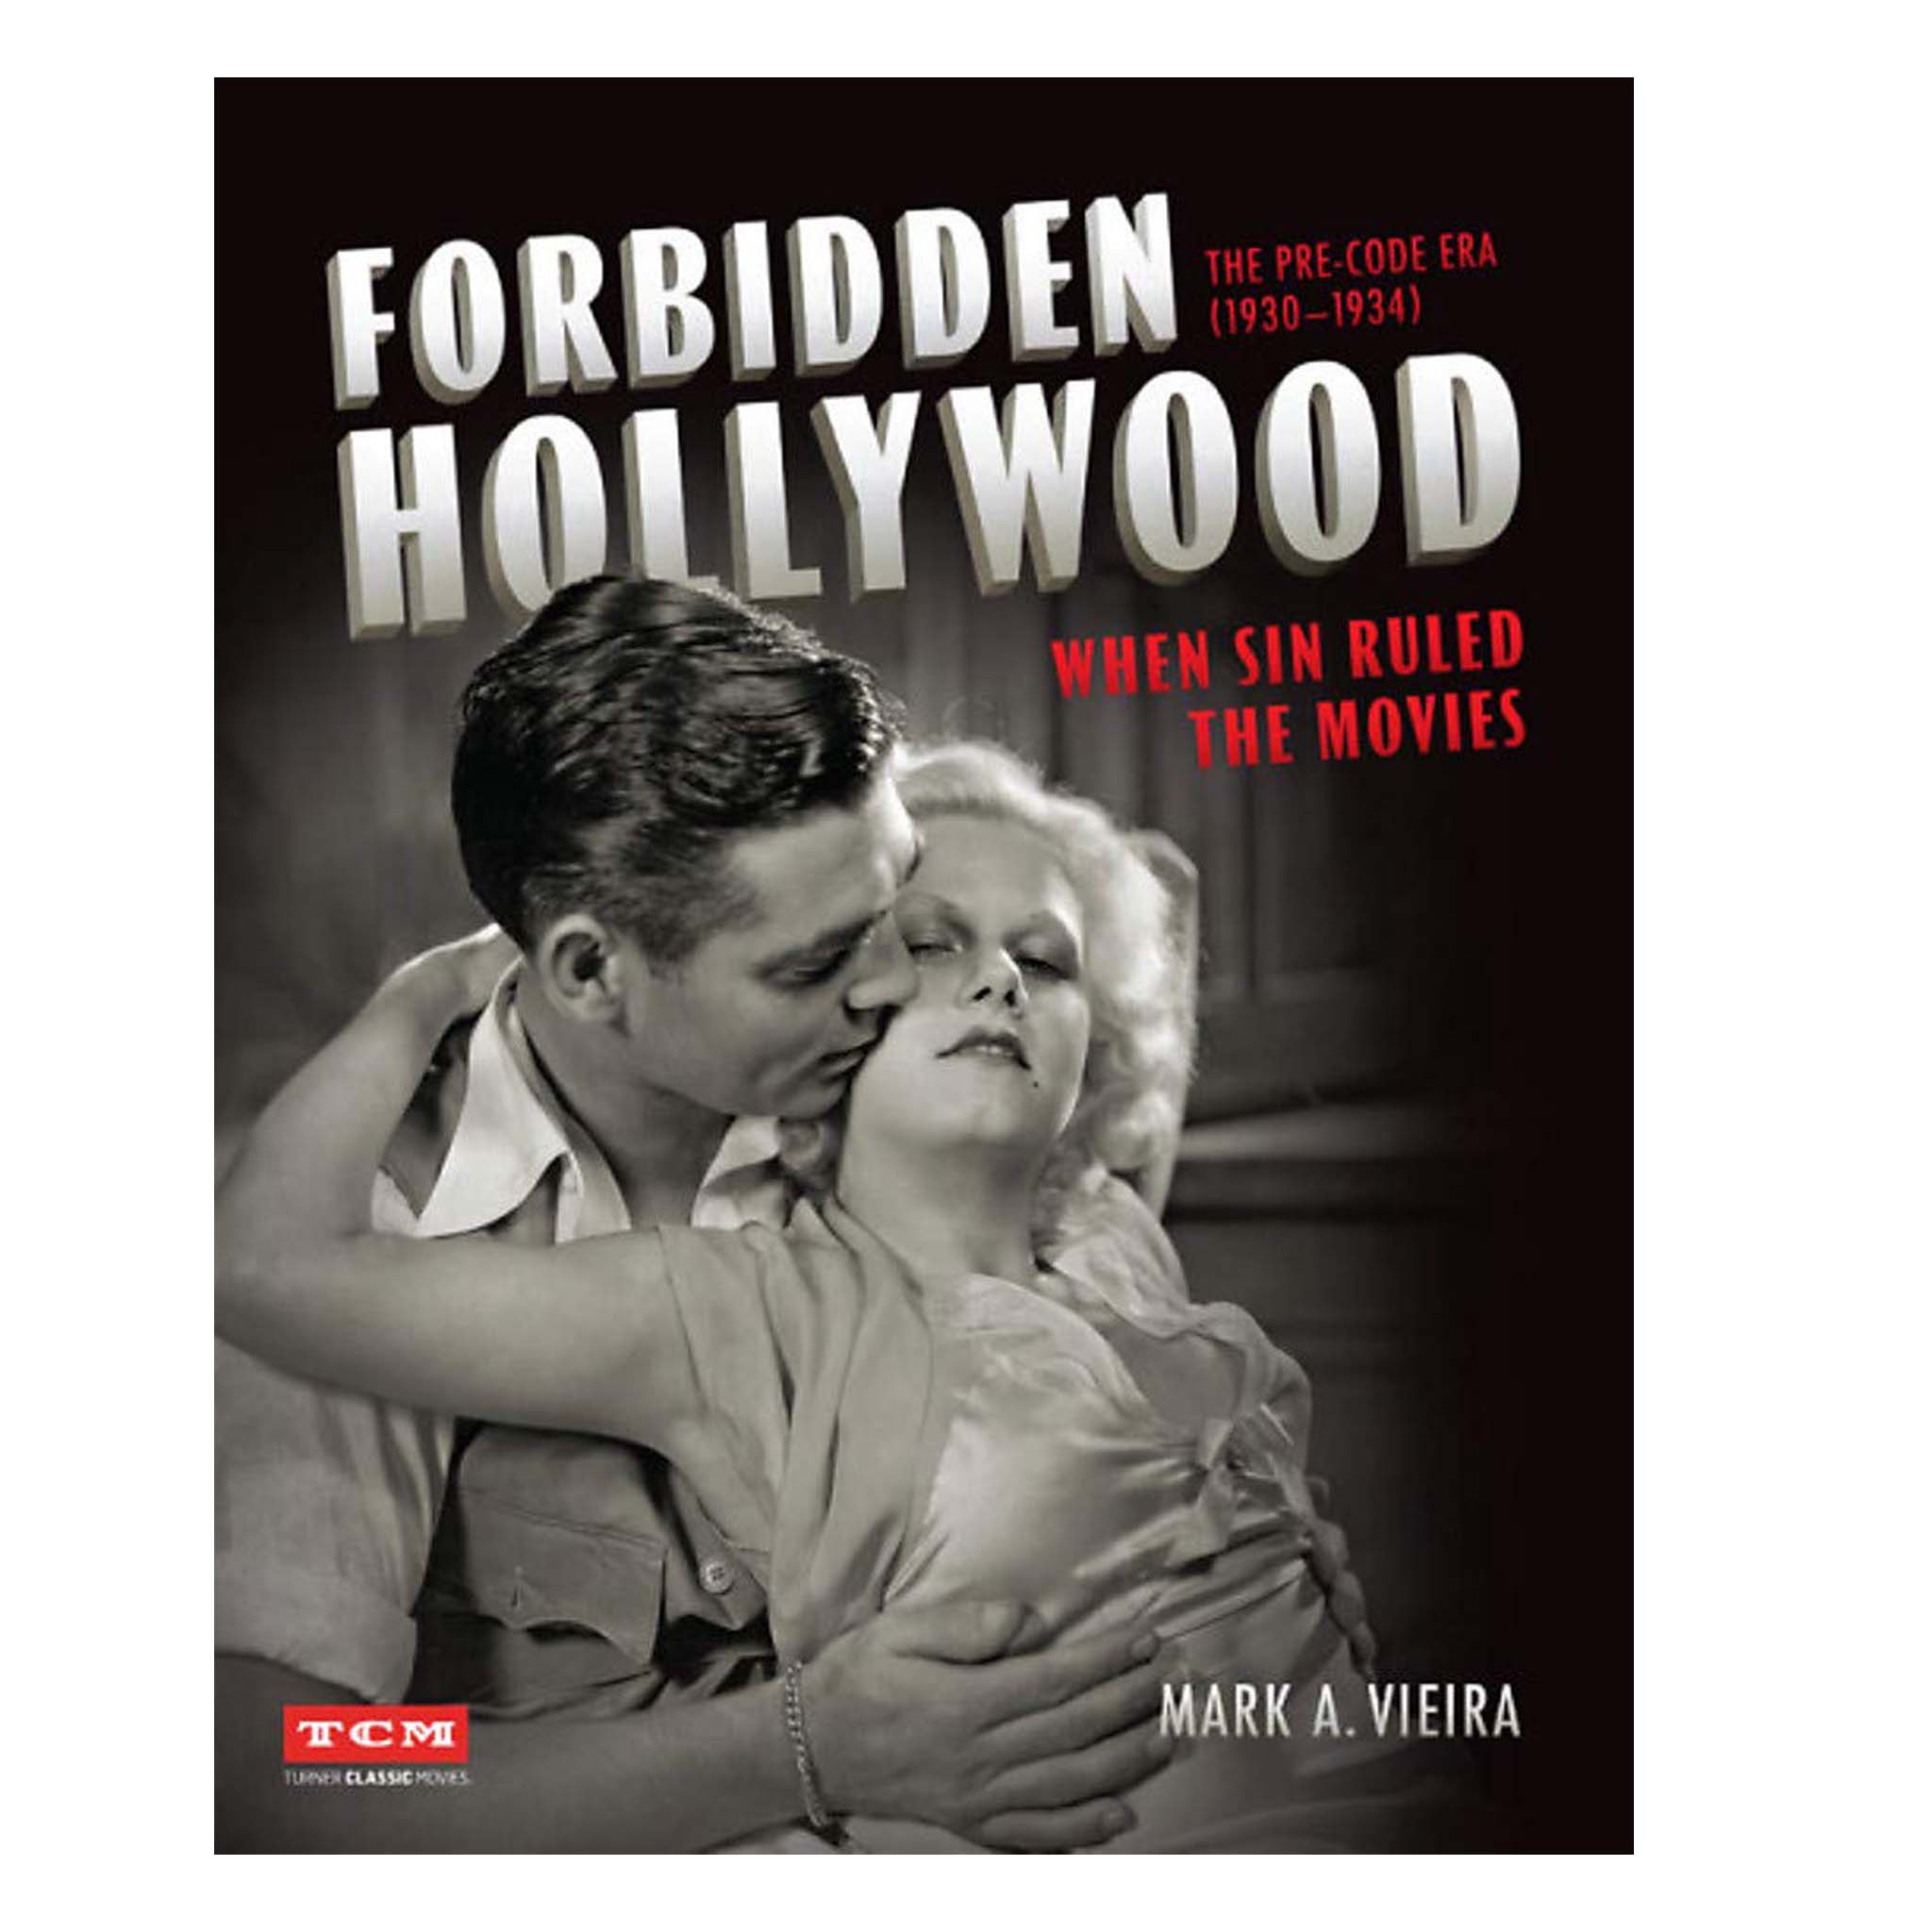 FORBIDDEN HOLLYWOOD: WHEN SIN RULED THE MOVIES